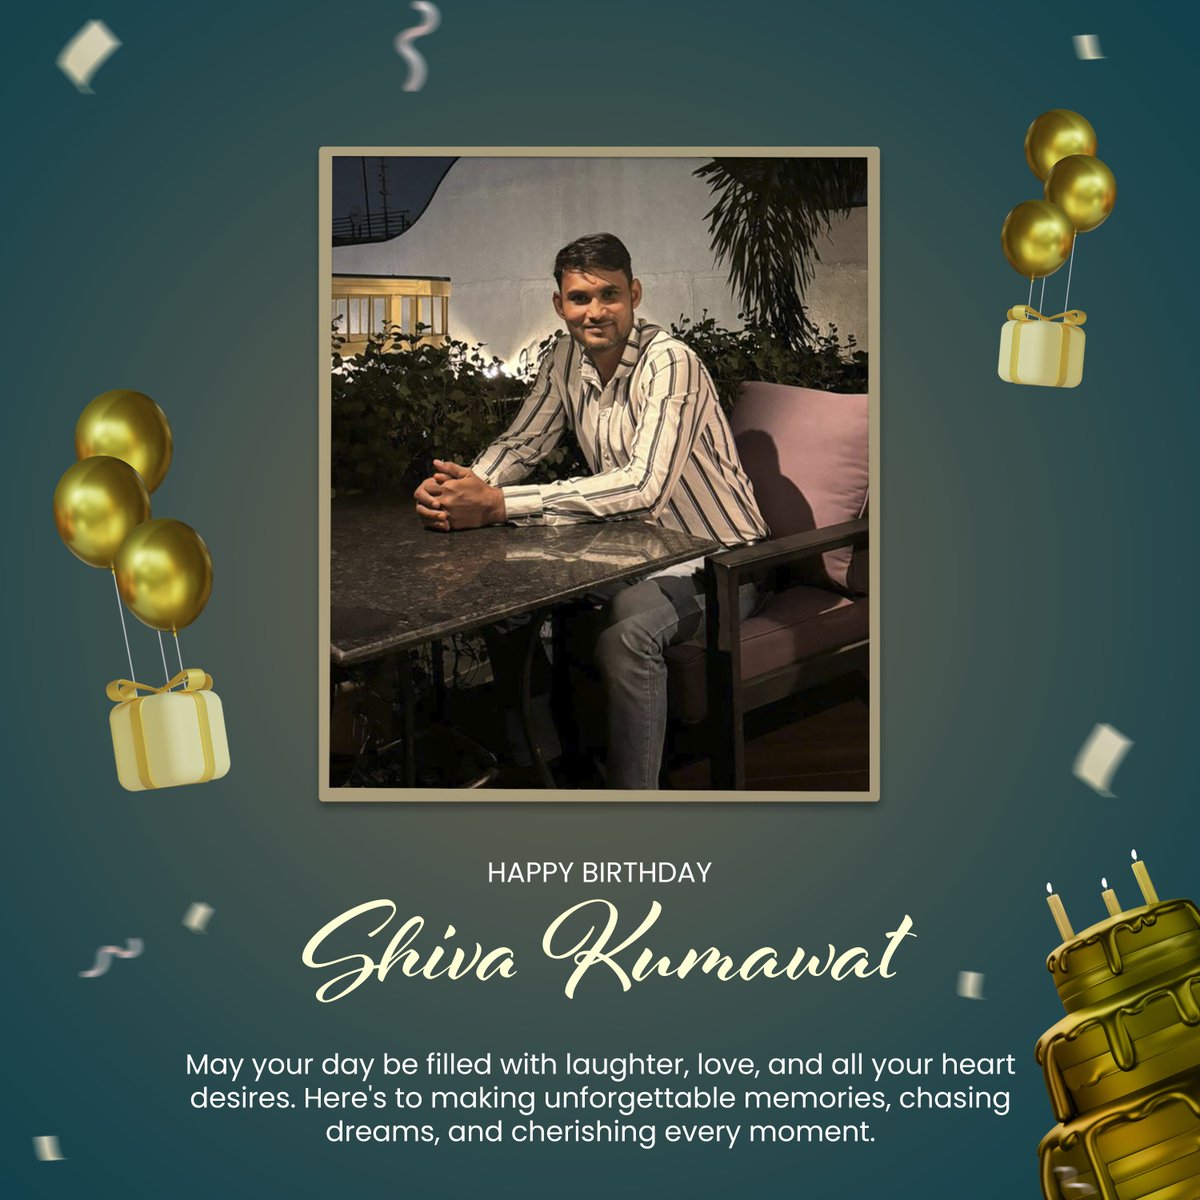 Here's to another year of conquering search engines with @ShivaKumawat88, our incredible SEO Maestro 🧙‍♂️!

May your rankings rise and your keywords always be relevant. 

Happy birthday! @ShivaKumawat88🌟

#birthday #attrock #marketingagency #digitalmarketing #employeebirthday